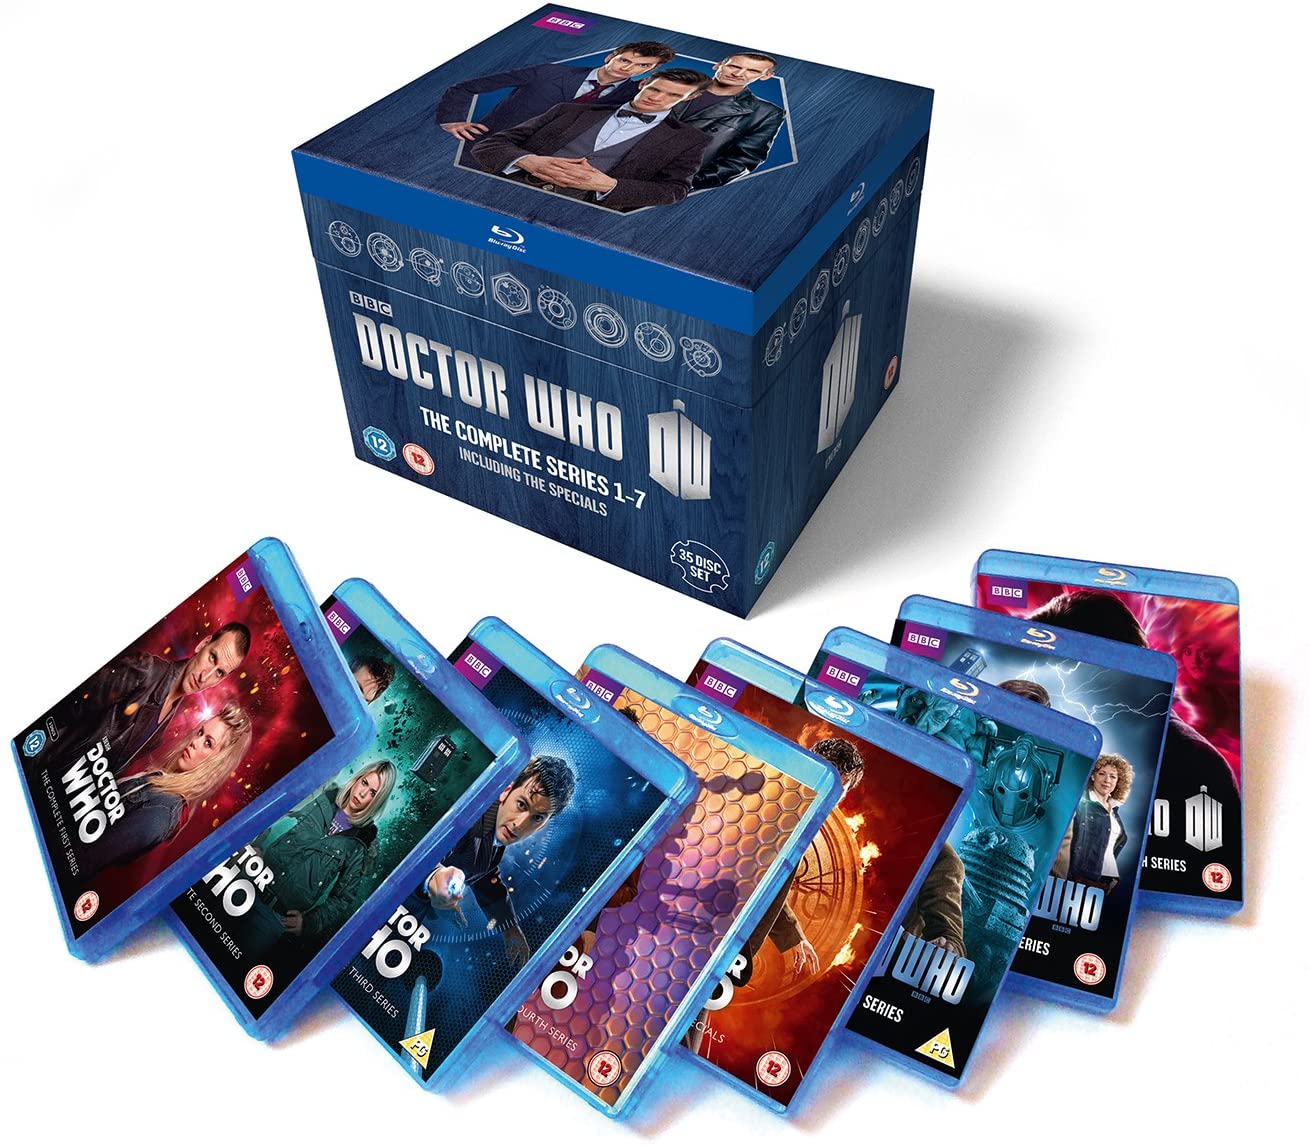 Doctor Who: The Complete Series One to Seven Blu-ray box-set